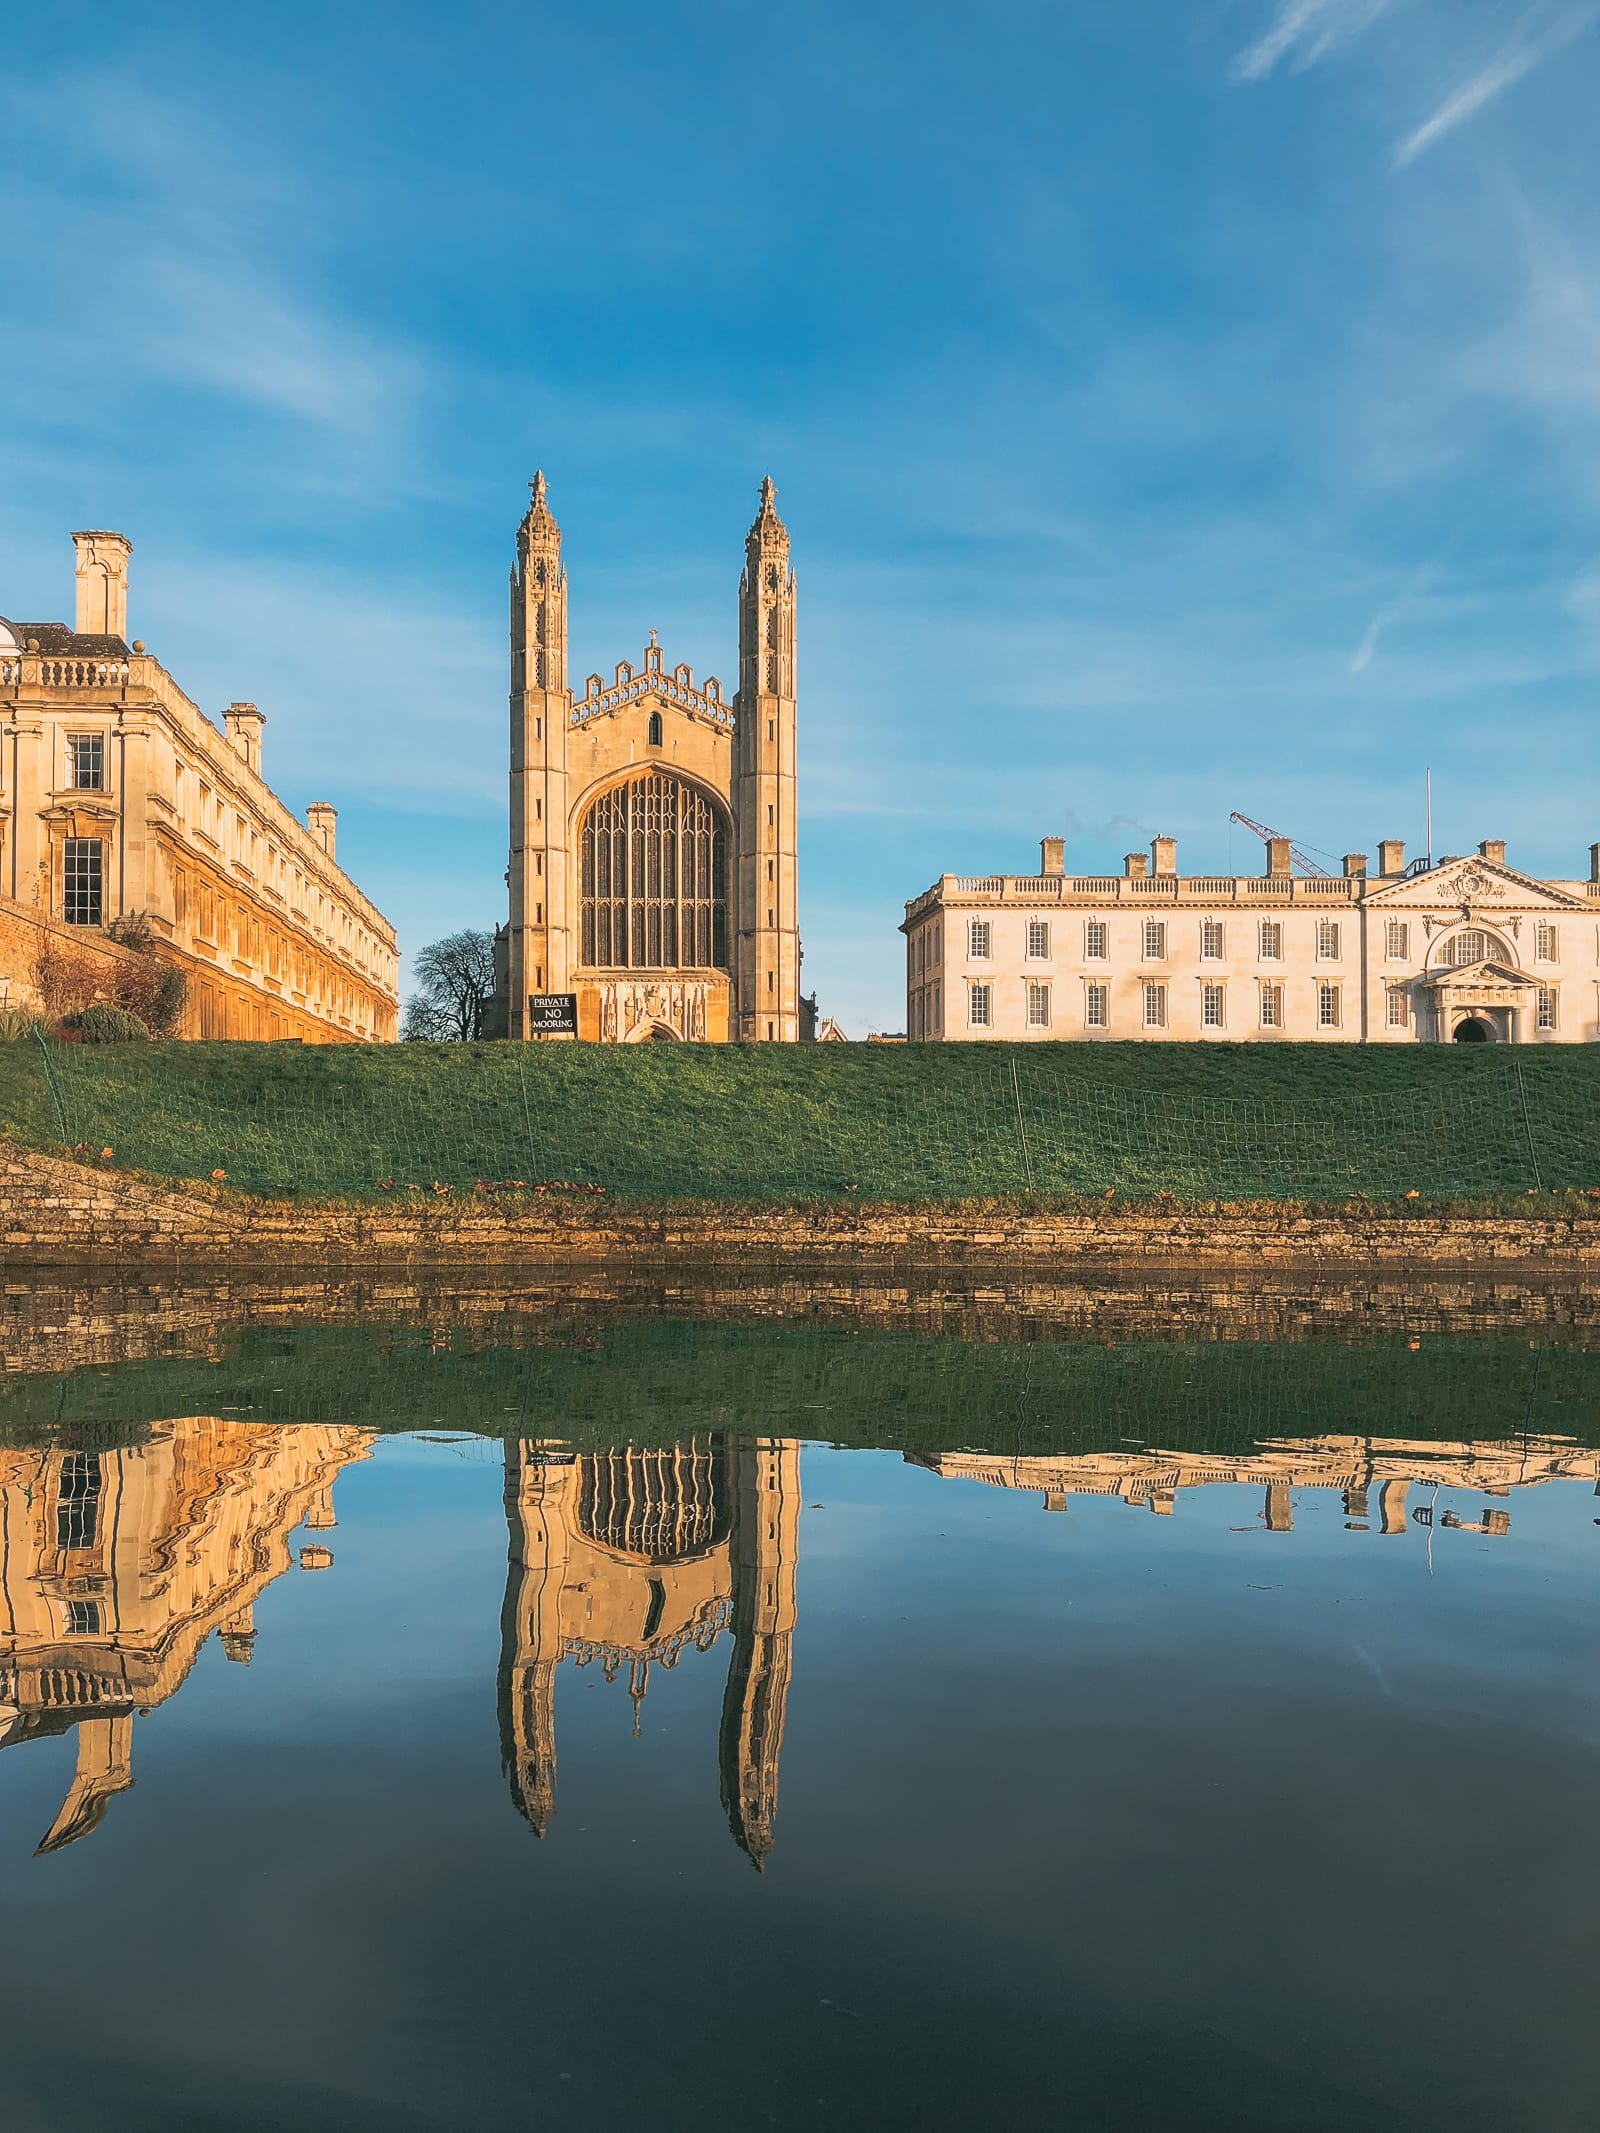 12 Experiences And Things To Do In Cambridge, England (7)